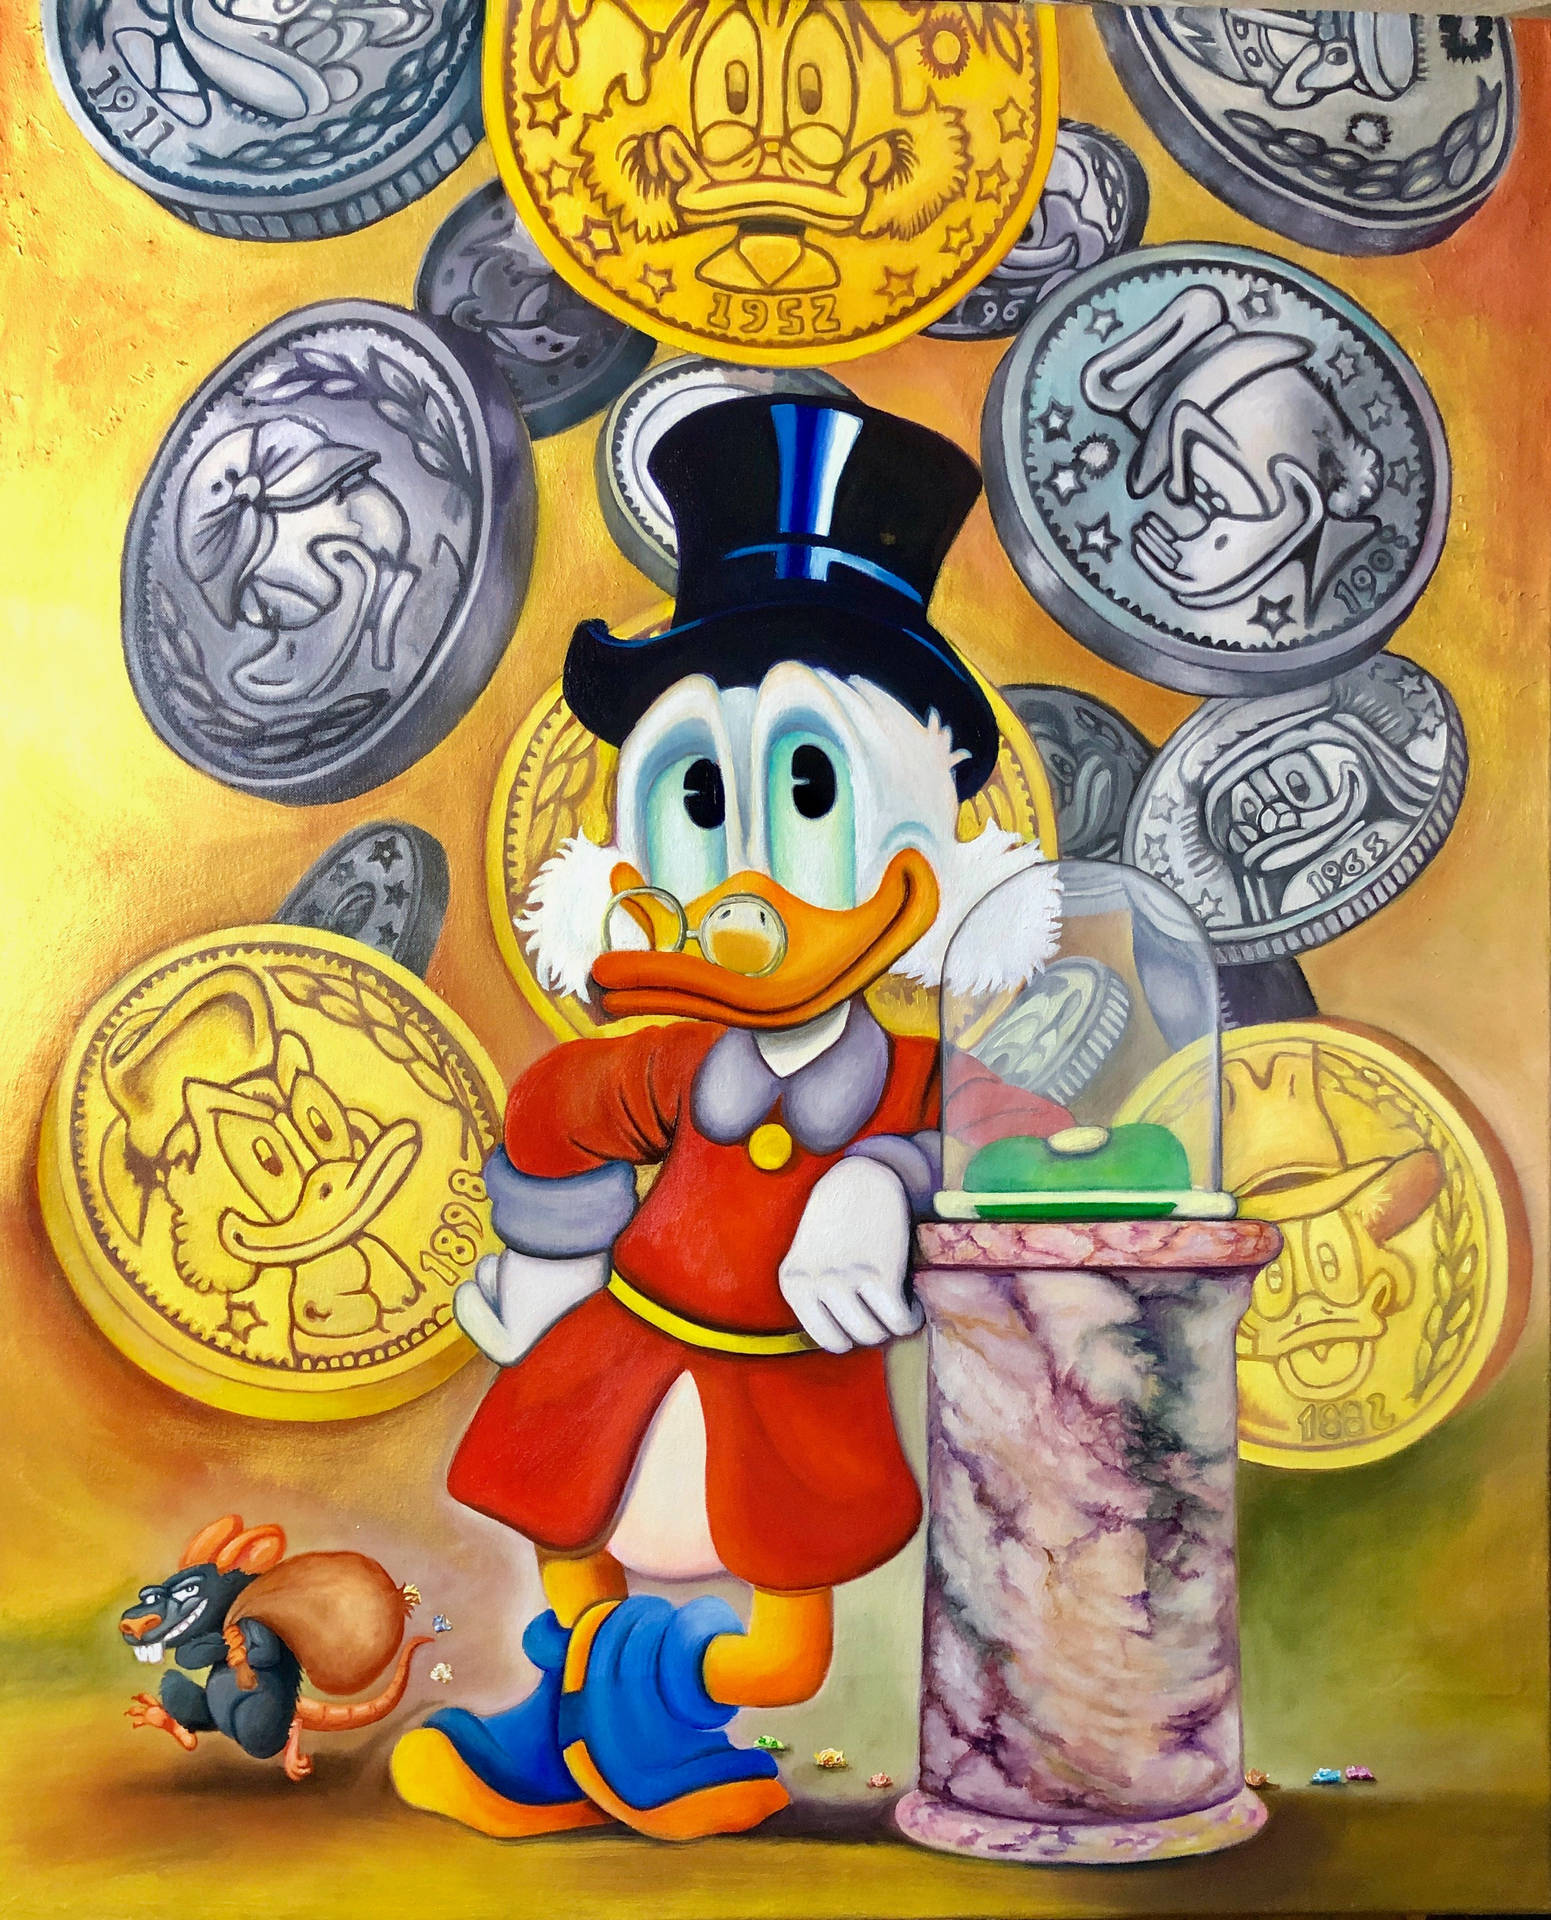 Scrooge McDuck Diving into a Sea of Coins Wallpaper